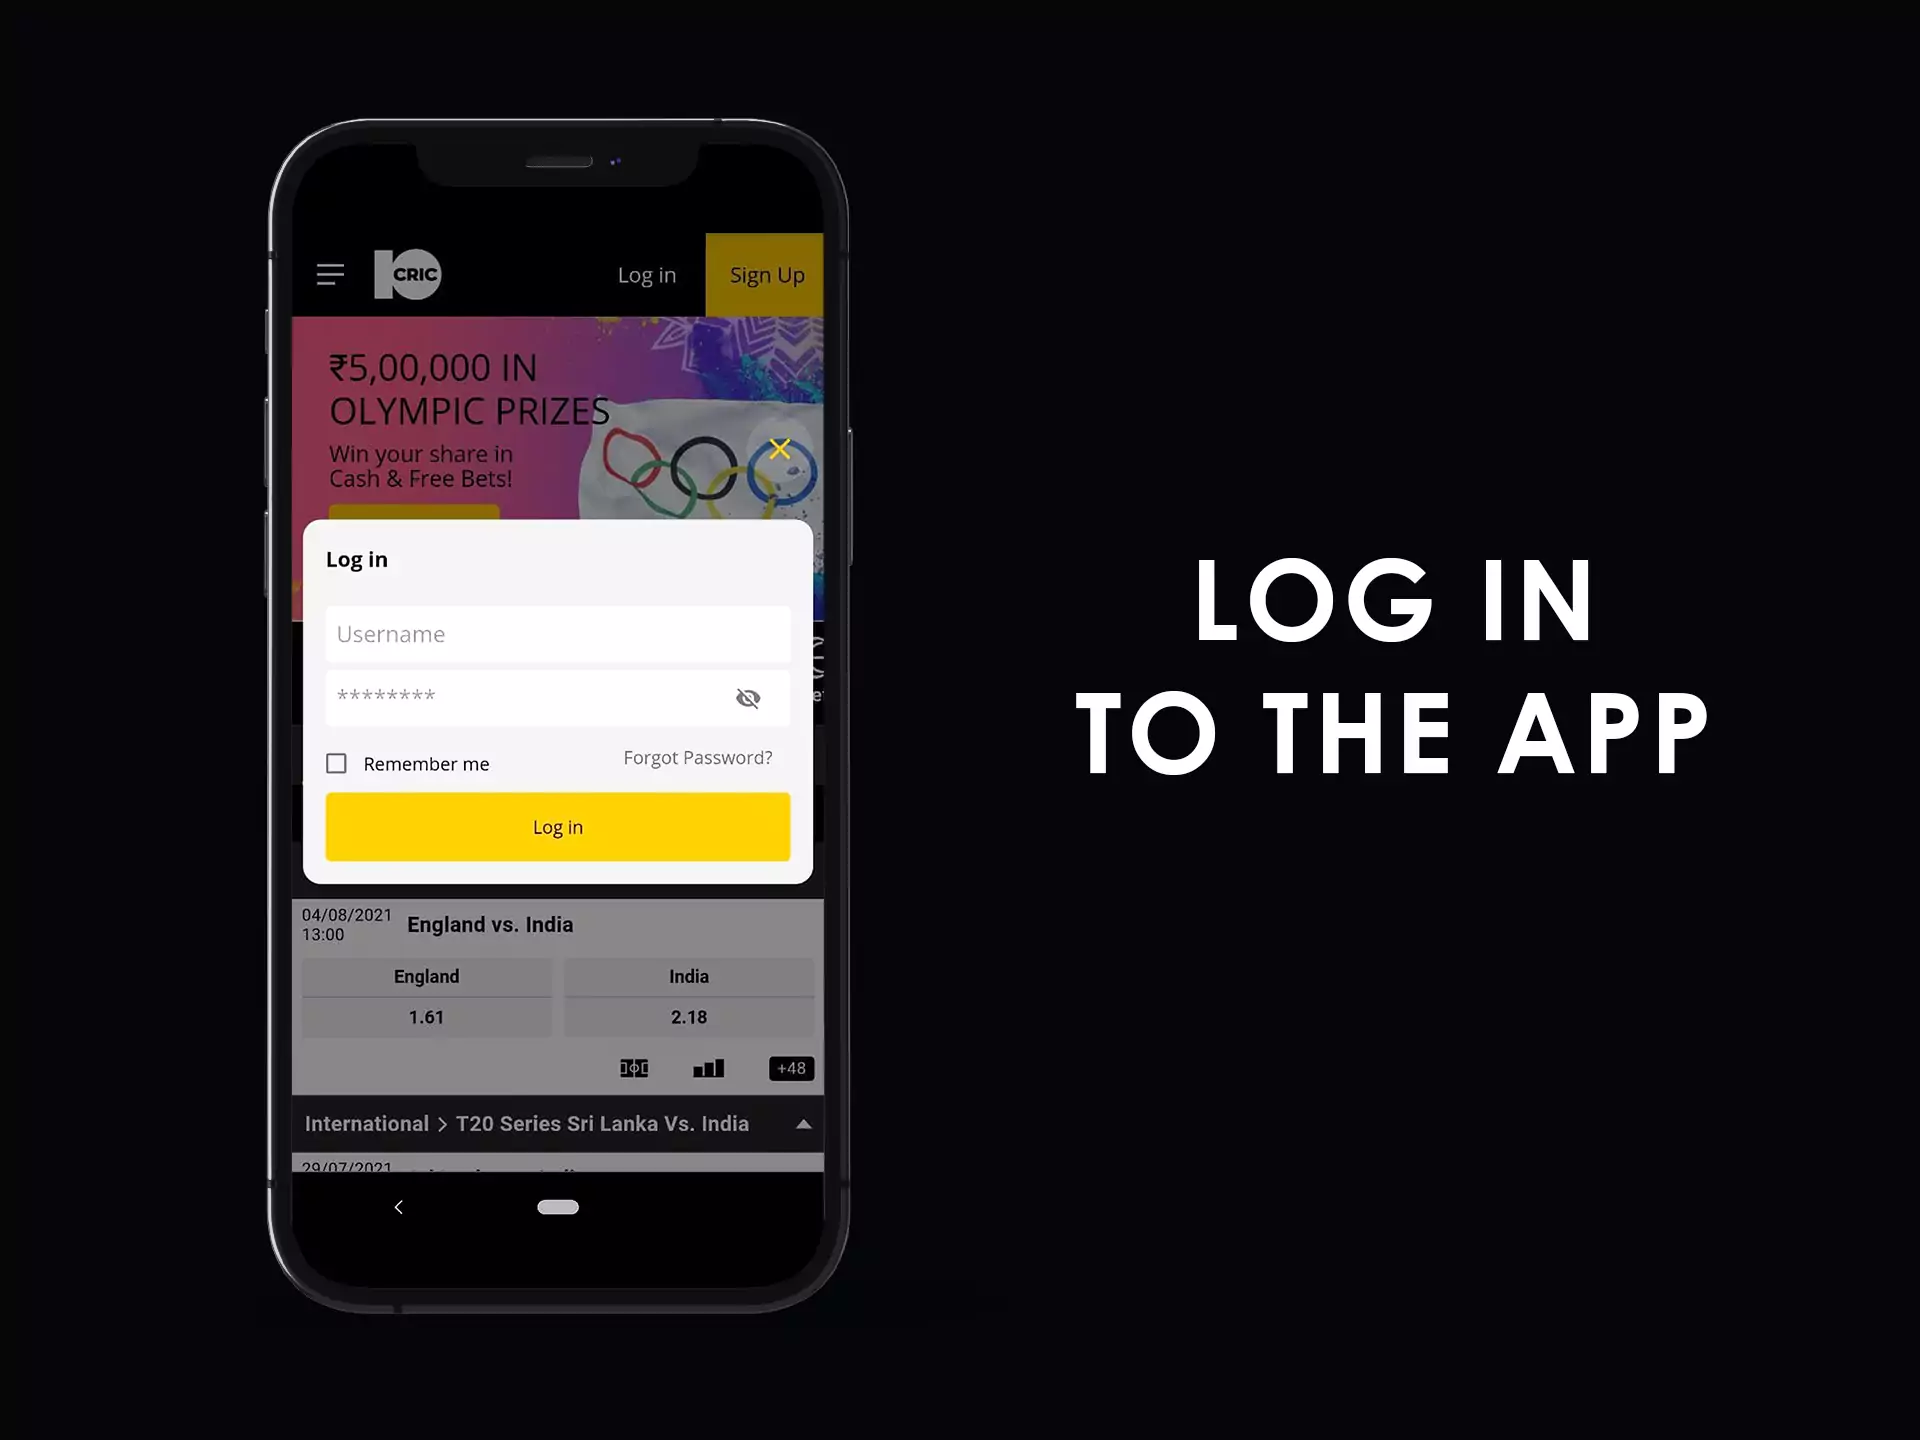 After the account was created you can log in to the app.